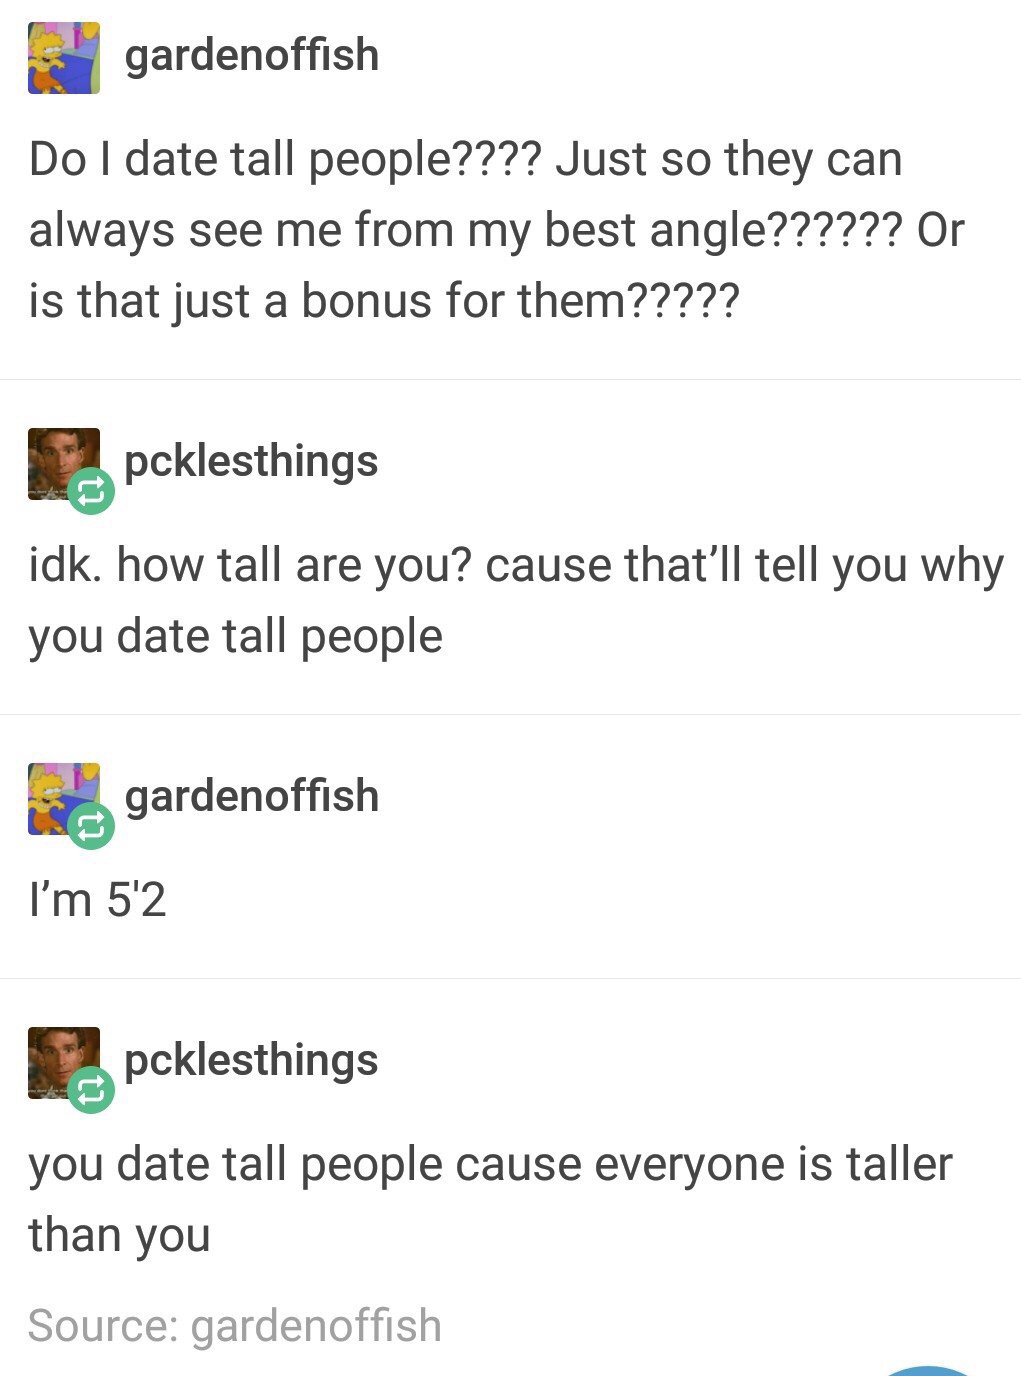 do i date tall people - ' gardenoffish Do I date tall people???? Just so they can always see me from my best angle?????? Or is that just a bonus for them????? 2 pcklesthings idk. how tall are you? cause that'll tell you why you date tall people gardenoffi